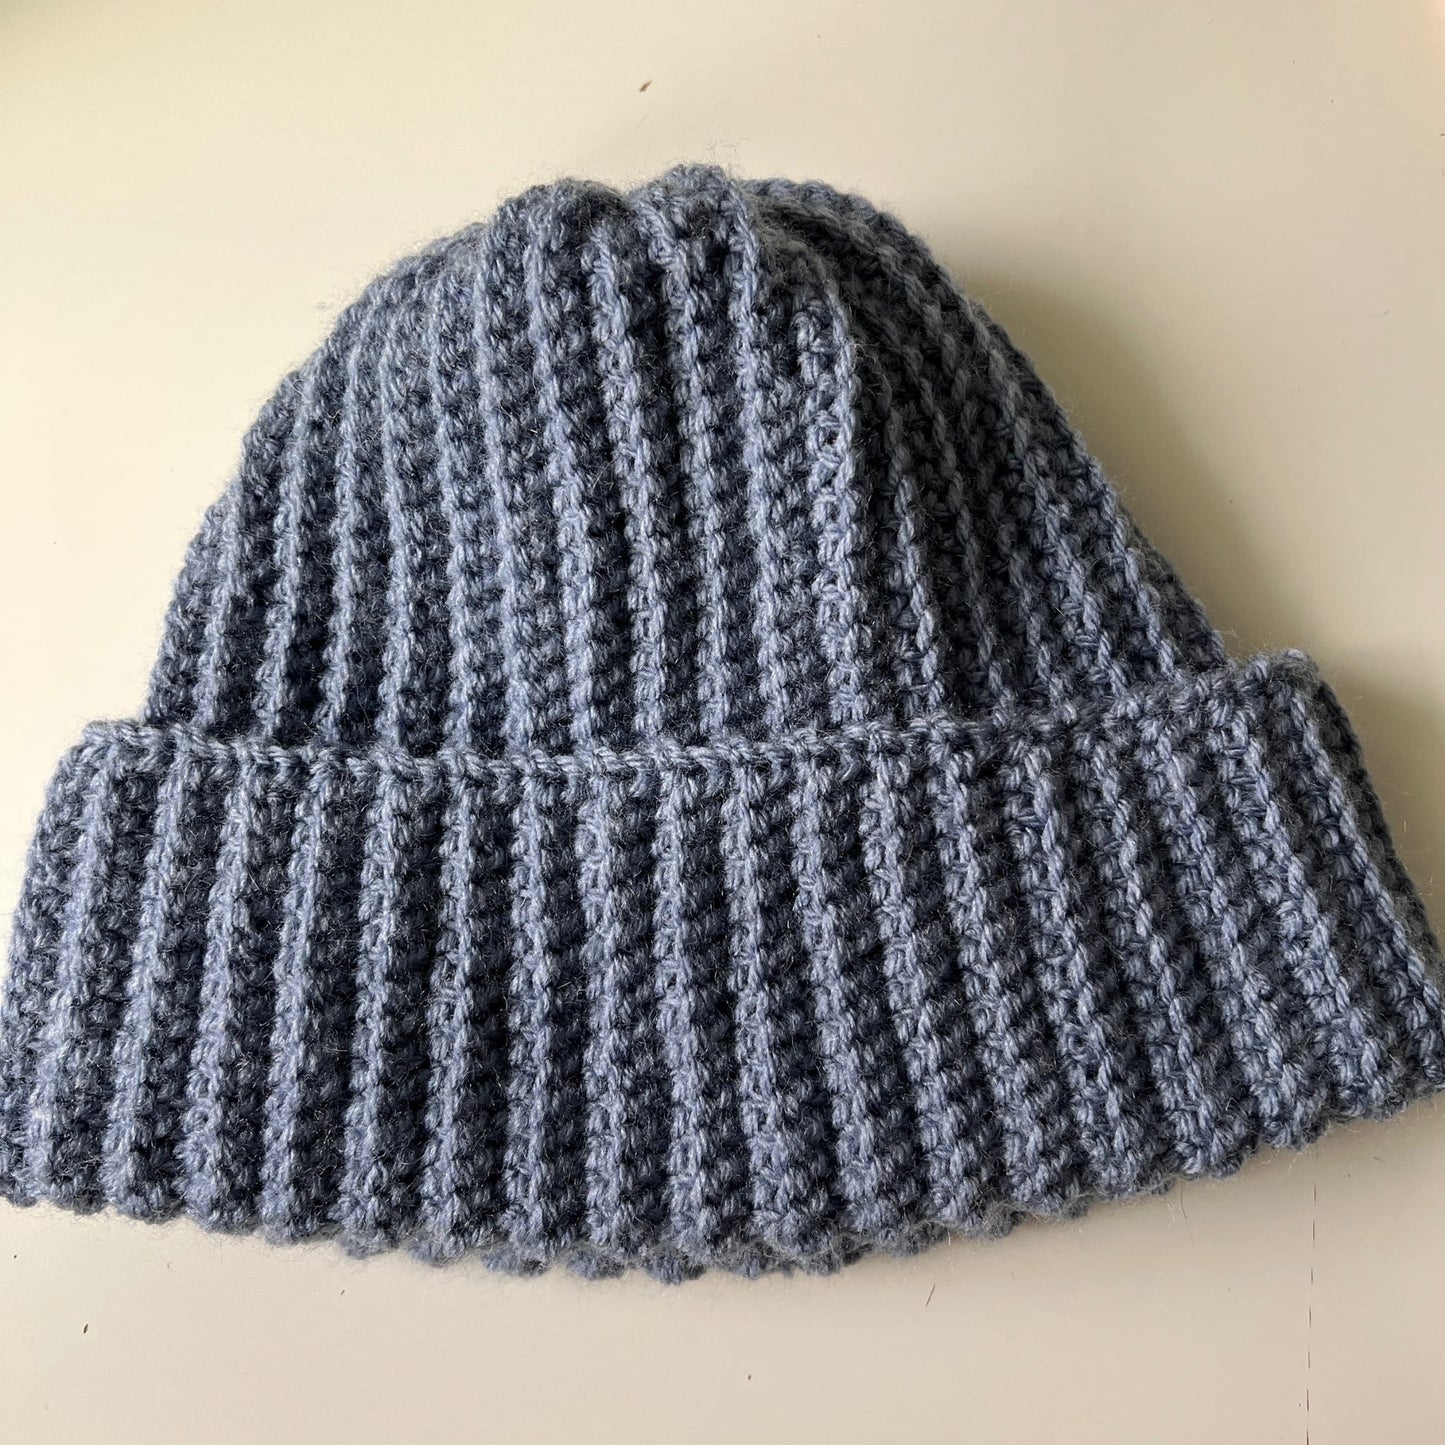 The Professional Beanie Pattern